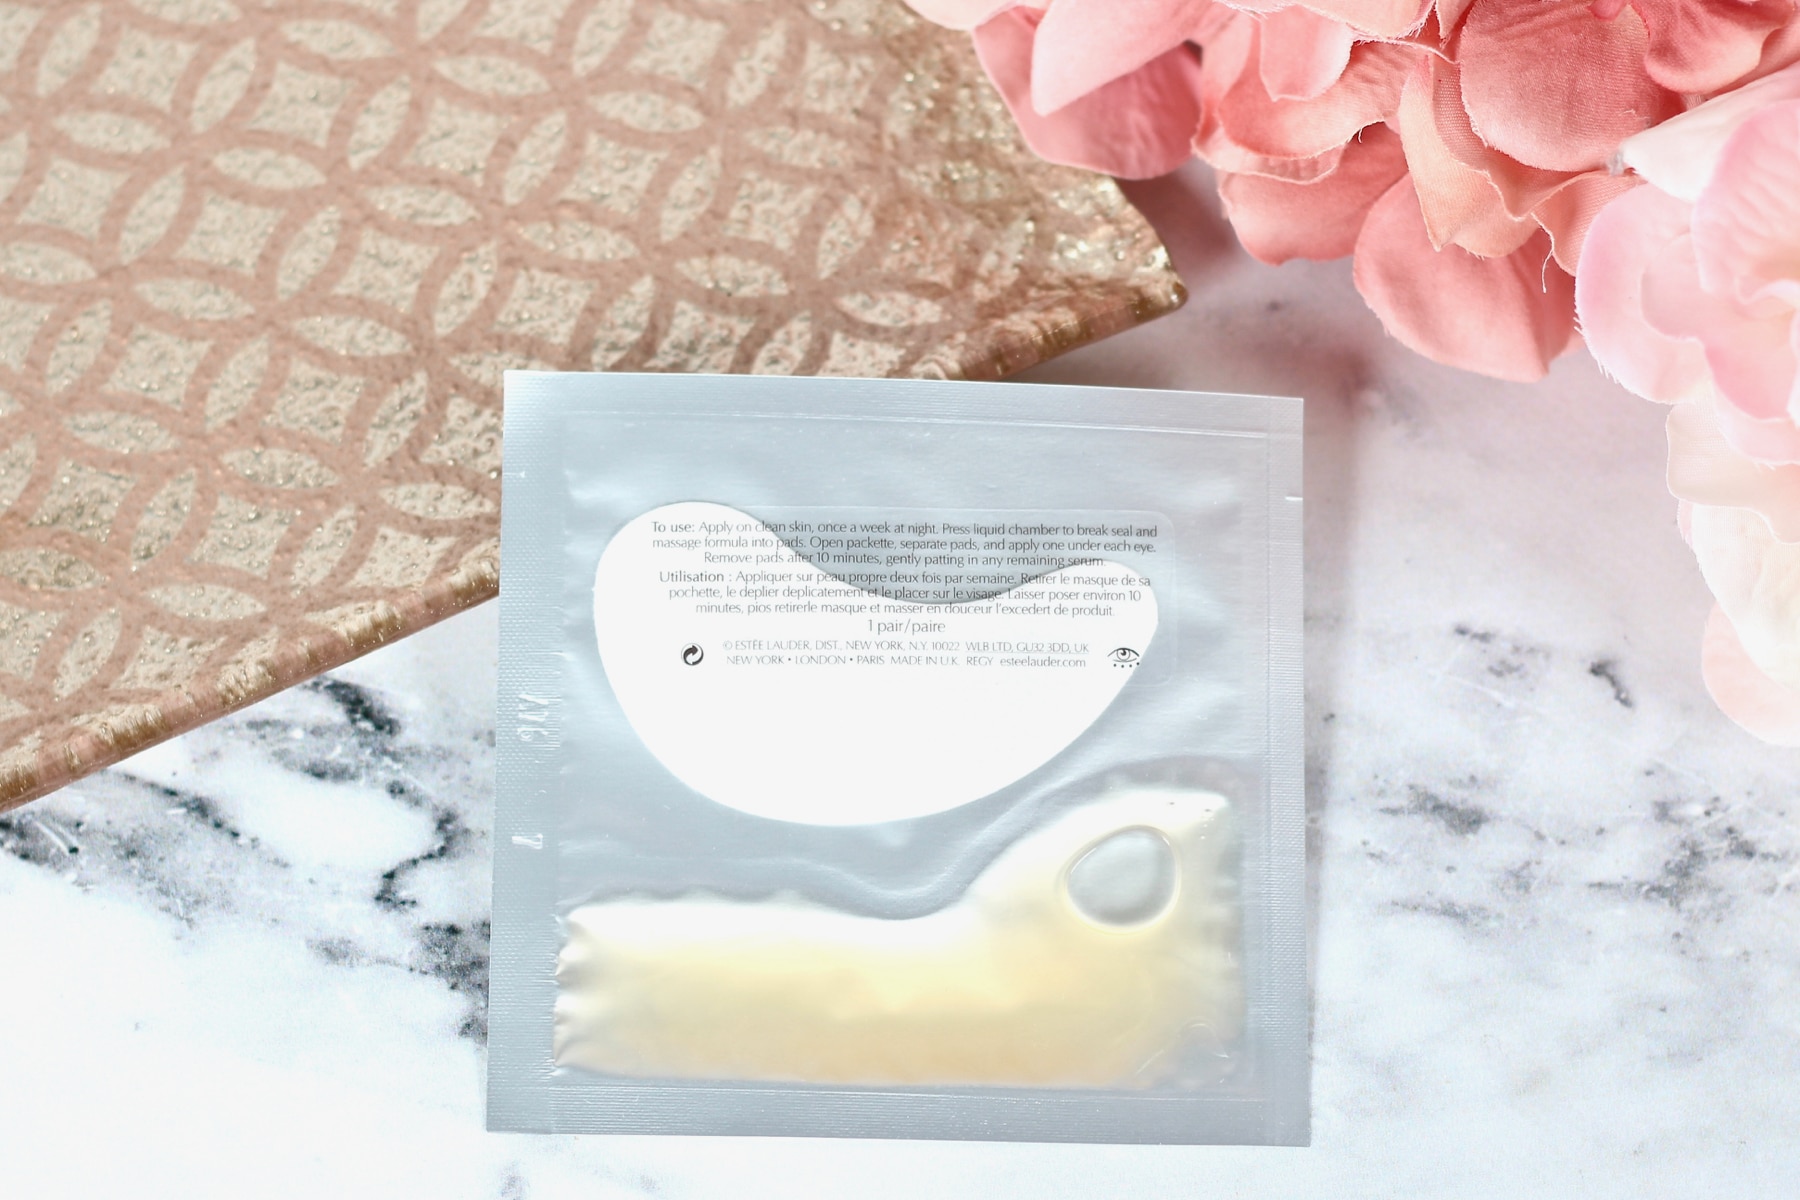 Estée Lauder Advanced Night Repair Concentrated Recovery Eye Mask Review